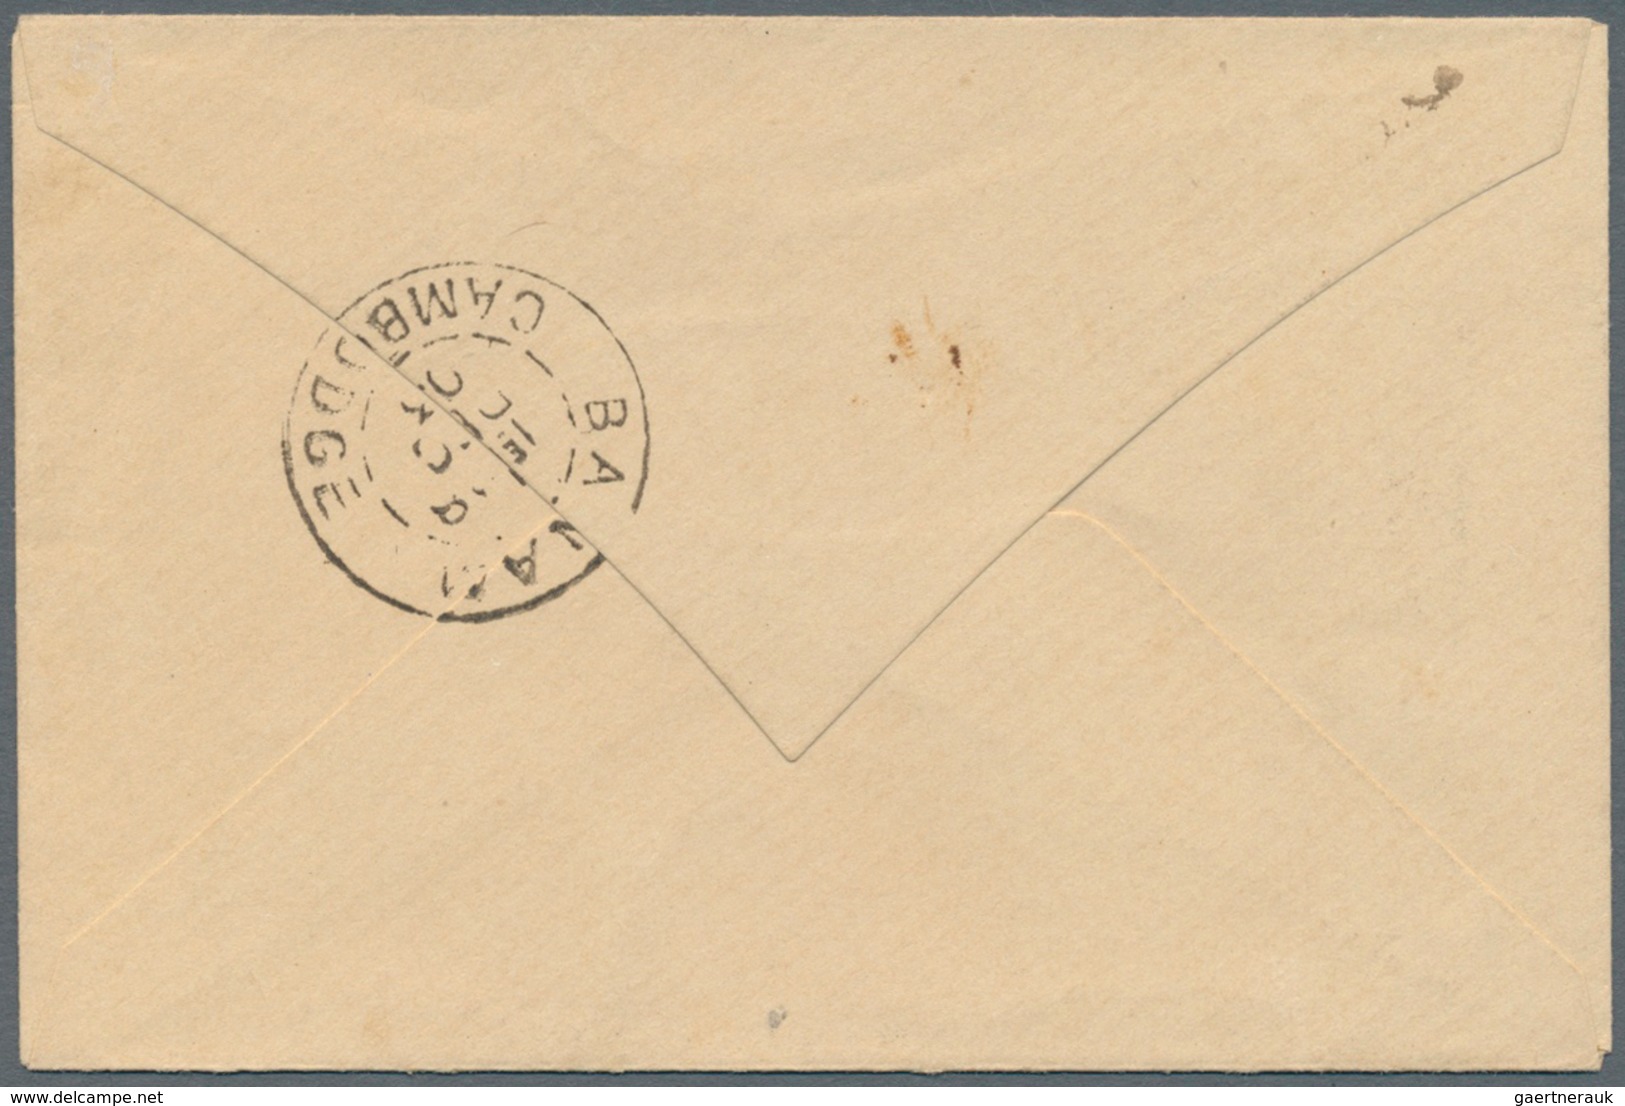 Kambodscha: 1903. French Indo-China Postal Stationery Envelope 5c Yellow- Green Cancelled By Soairie - Cambodja